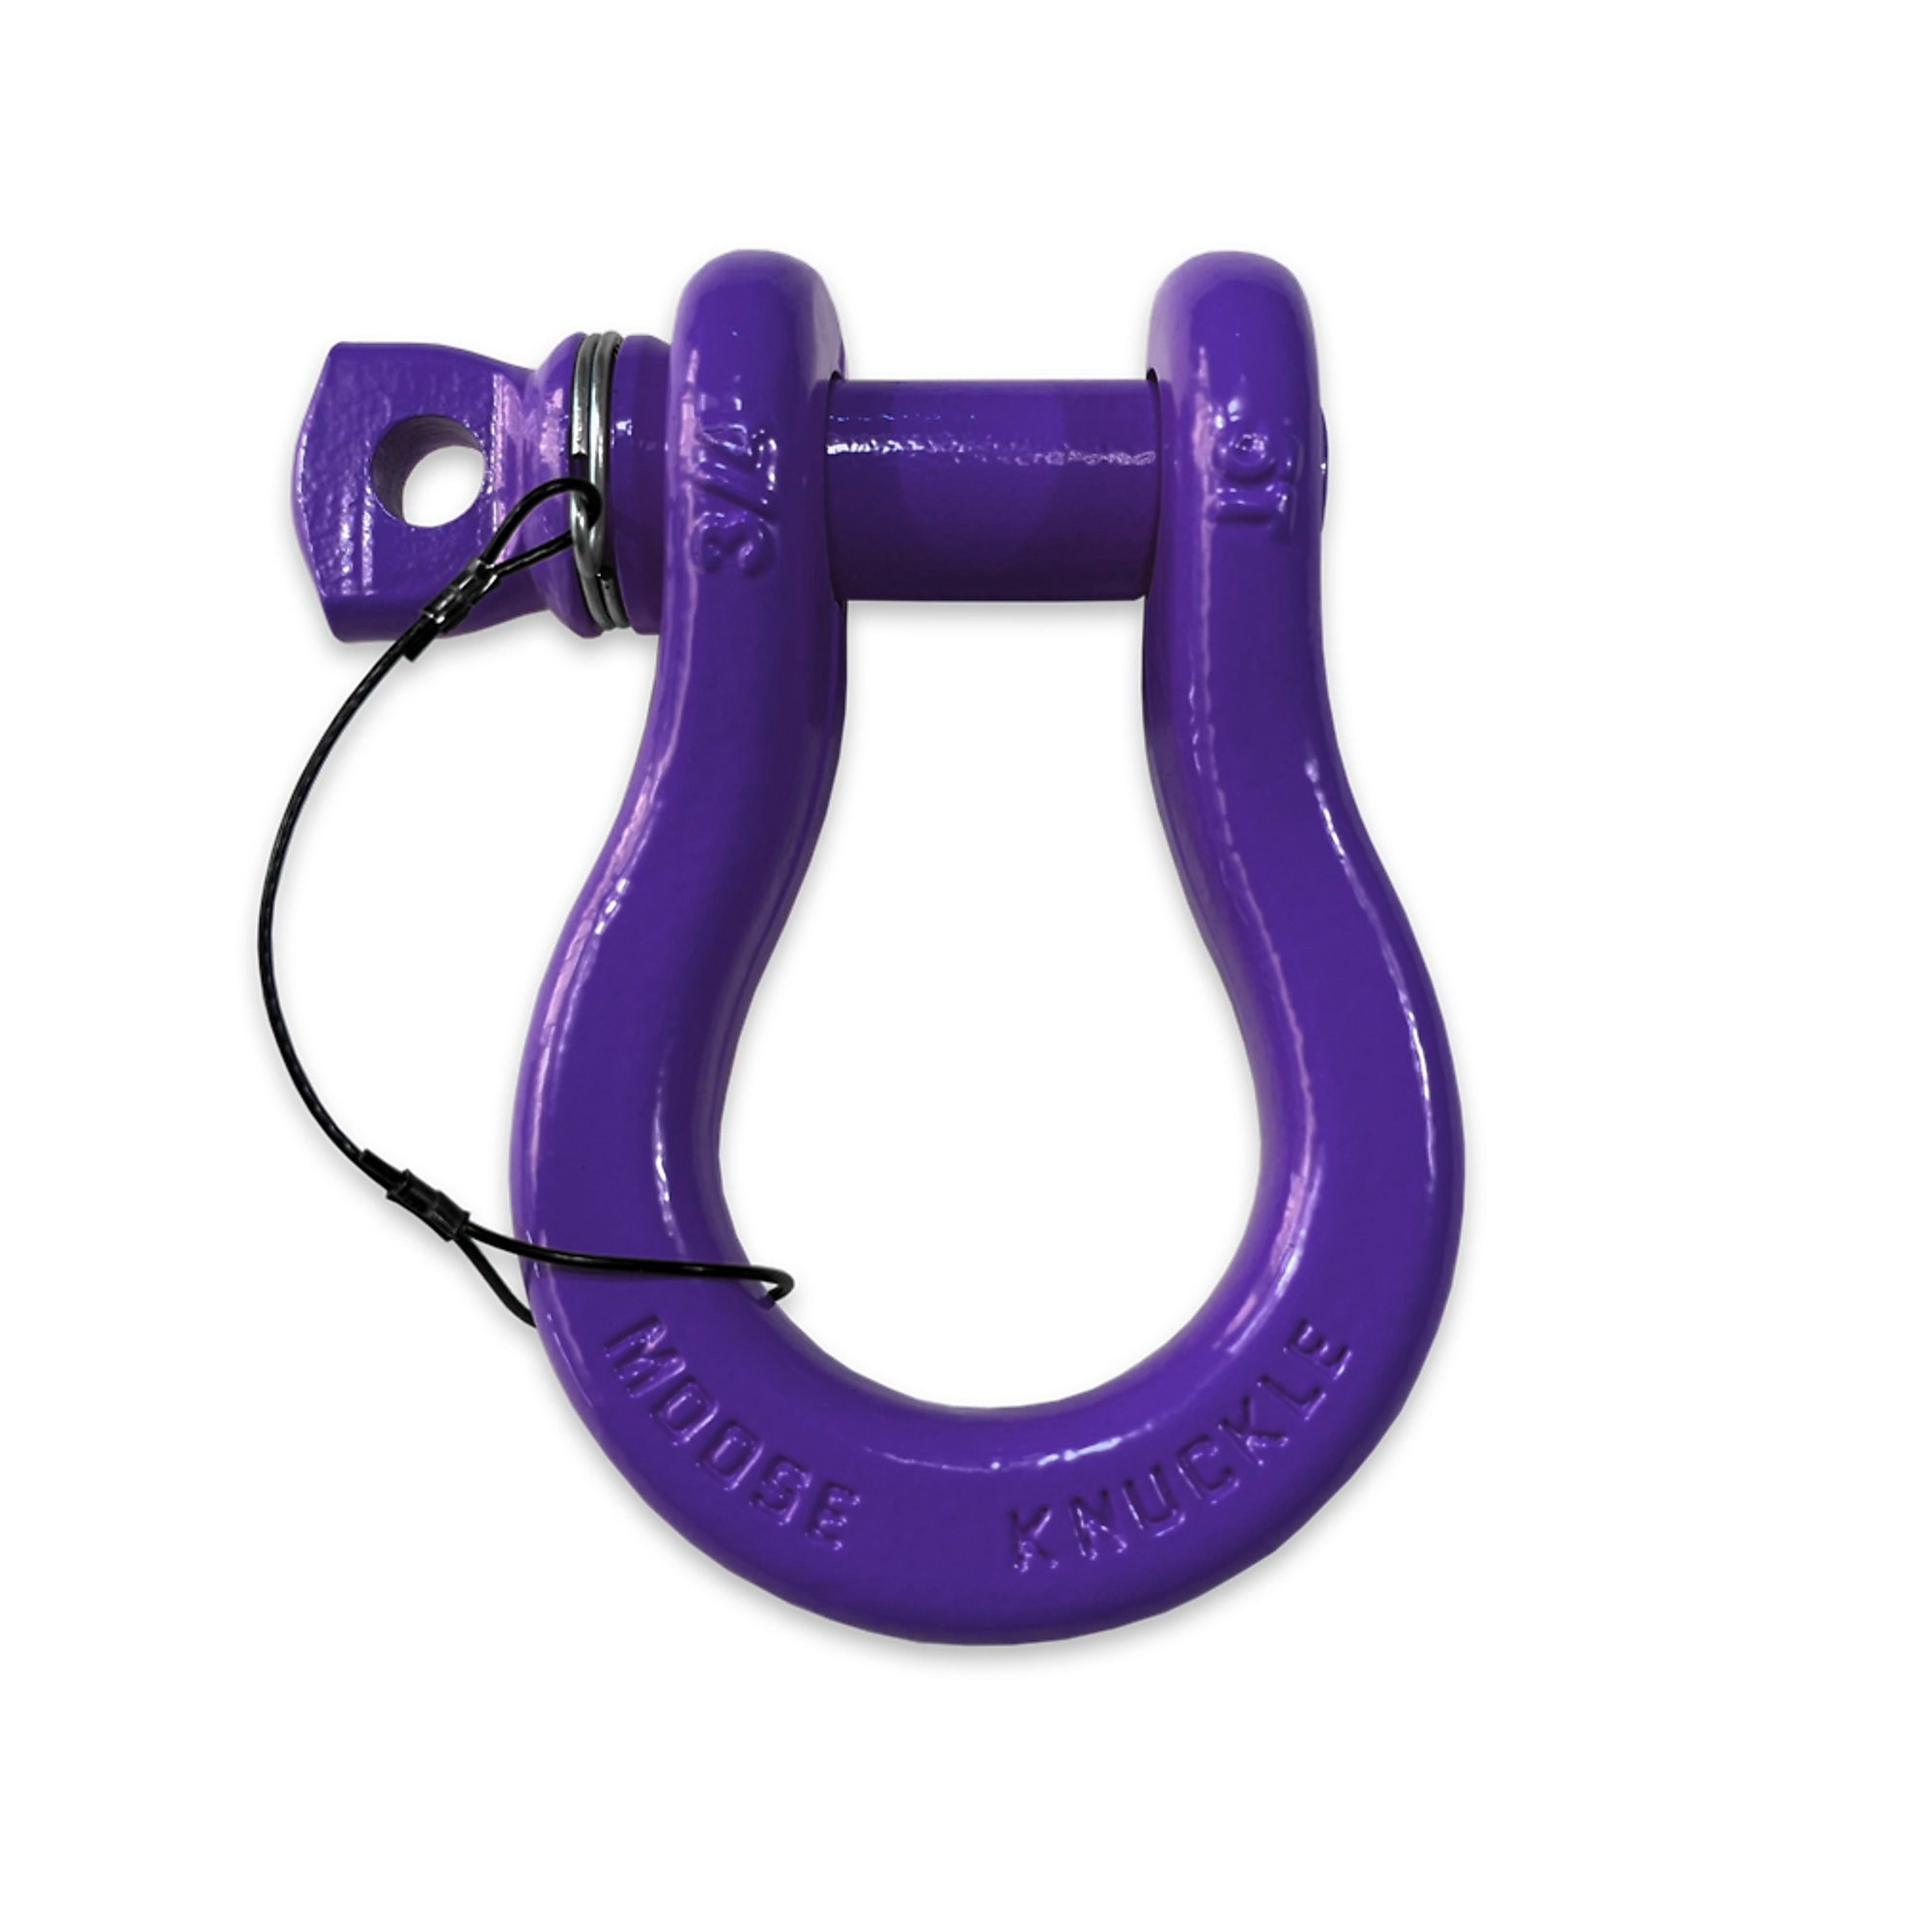 Moose Knuckle Offroad, Grape Escape Recovery Tow Lanyard Spin Pin 3/4 Shackle, Working Load Limit 10000 lb, Model FN000023-004